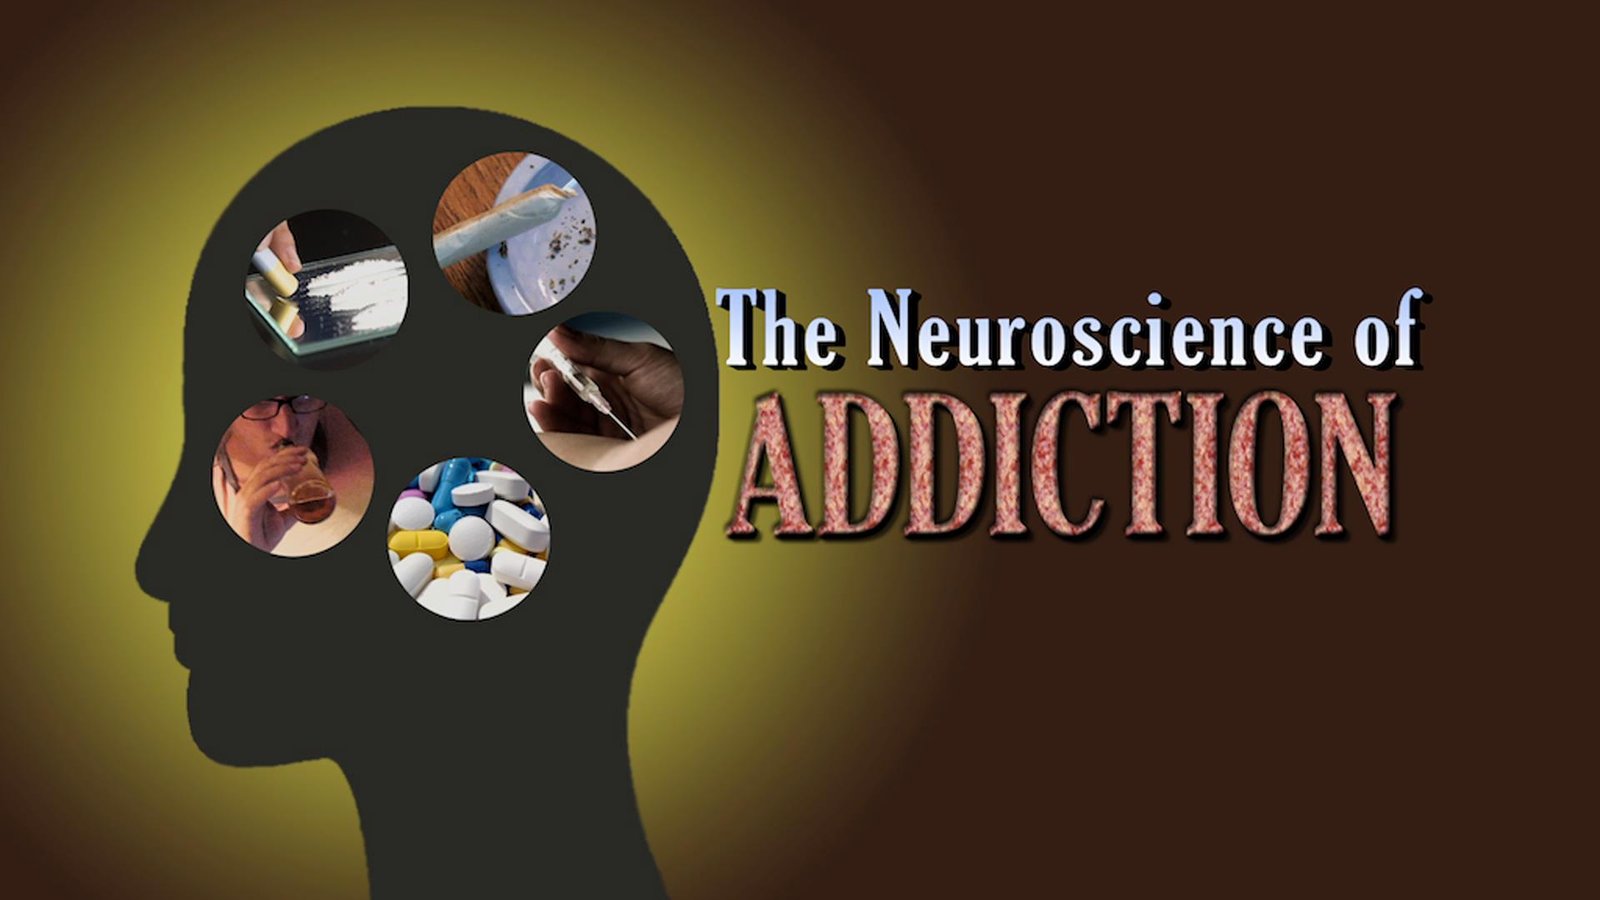 The Neuroscience of Addiction - Substance Abuse and Brain Science